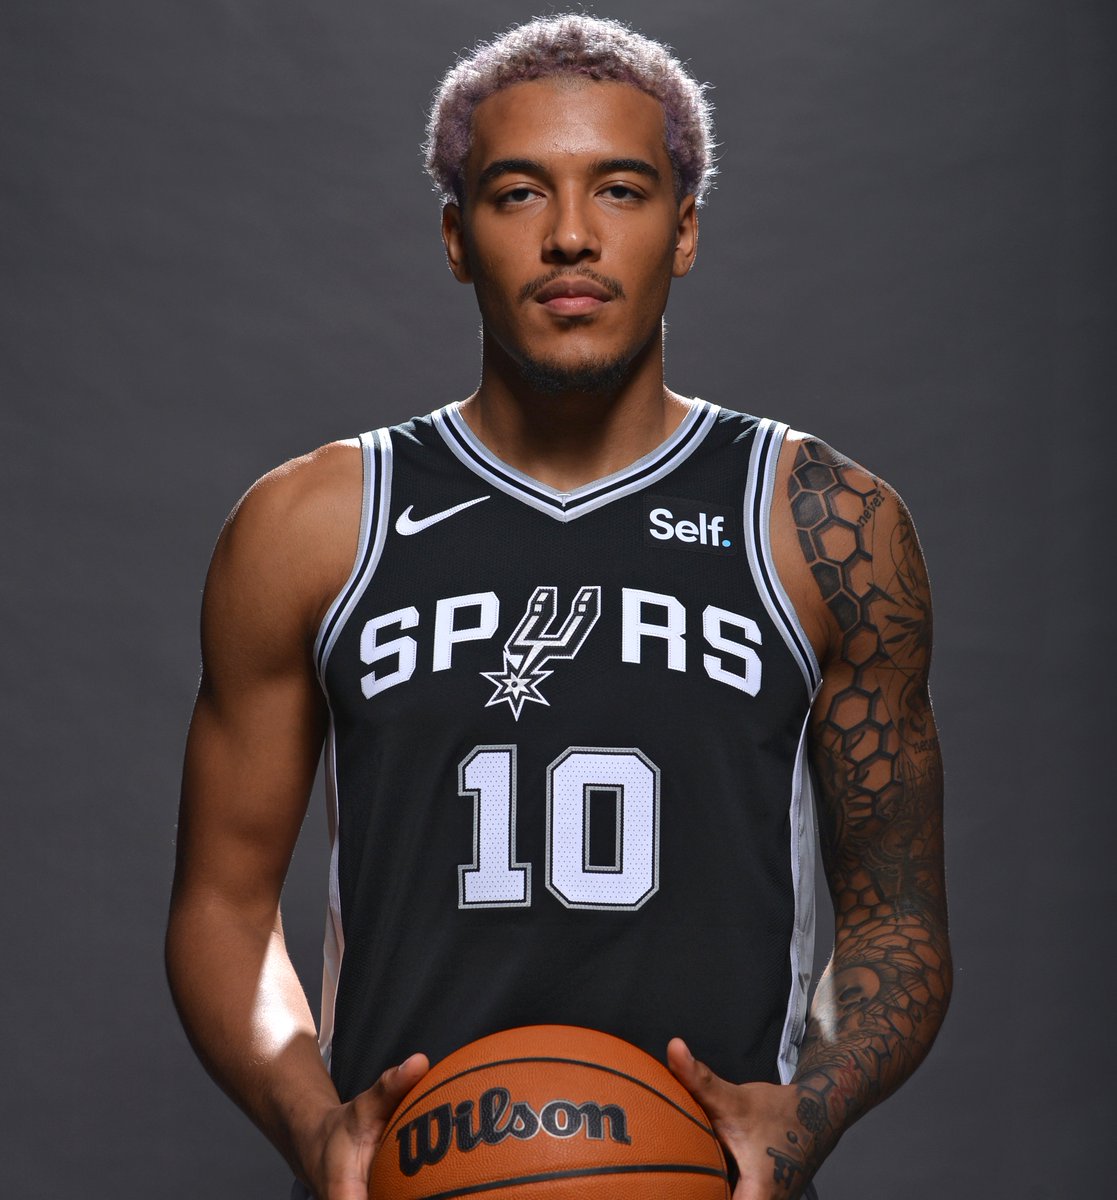 Join us in wishing @JeremySochan of the @Spurs a HAPPY 21st BIRTHDAY! #NBABDAY